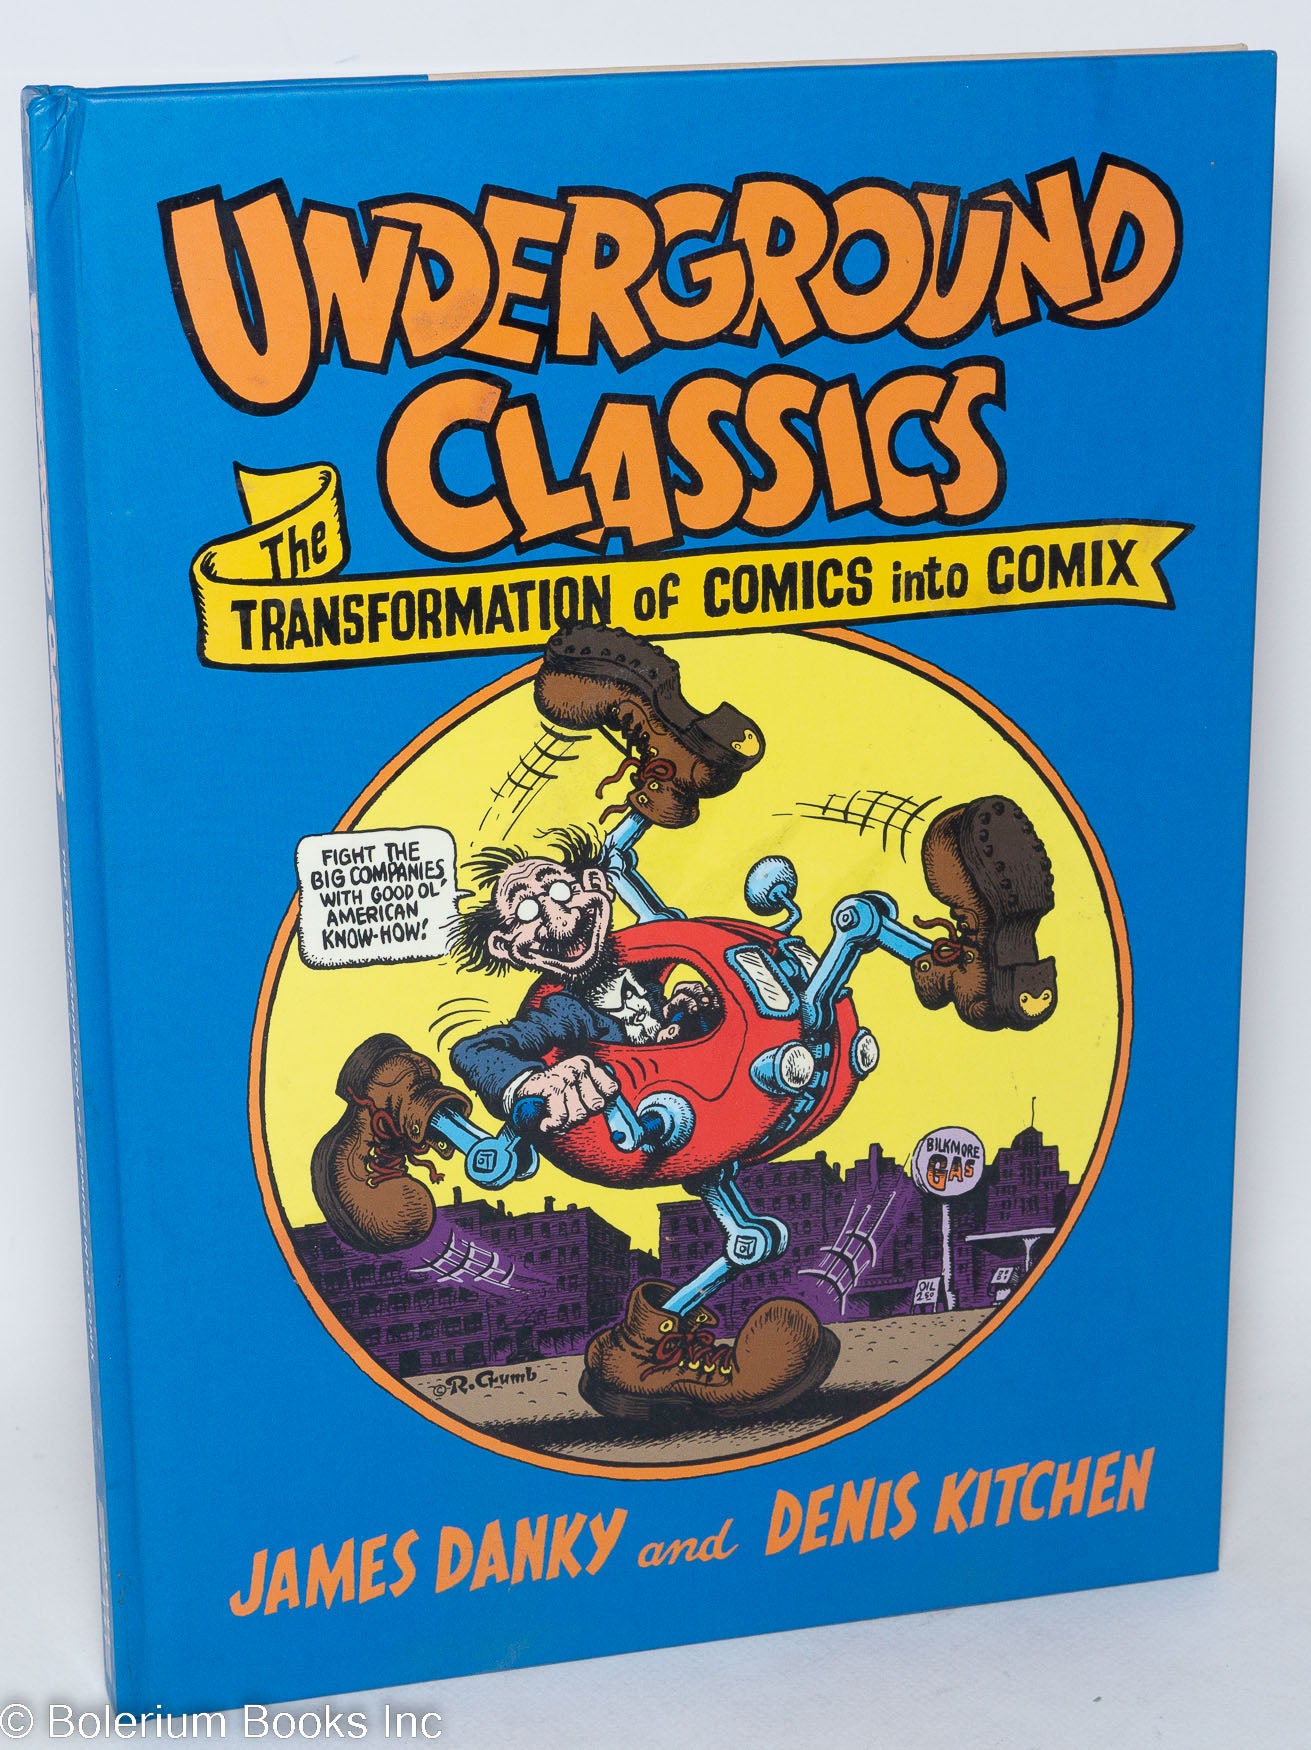 Introduction　Kitchen　Underground　into　Lynch　Danky,　comics　Denis　classics,　the　comix.　James　transformation　Jay　of　by